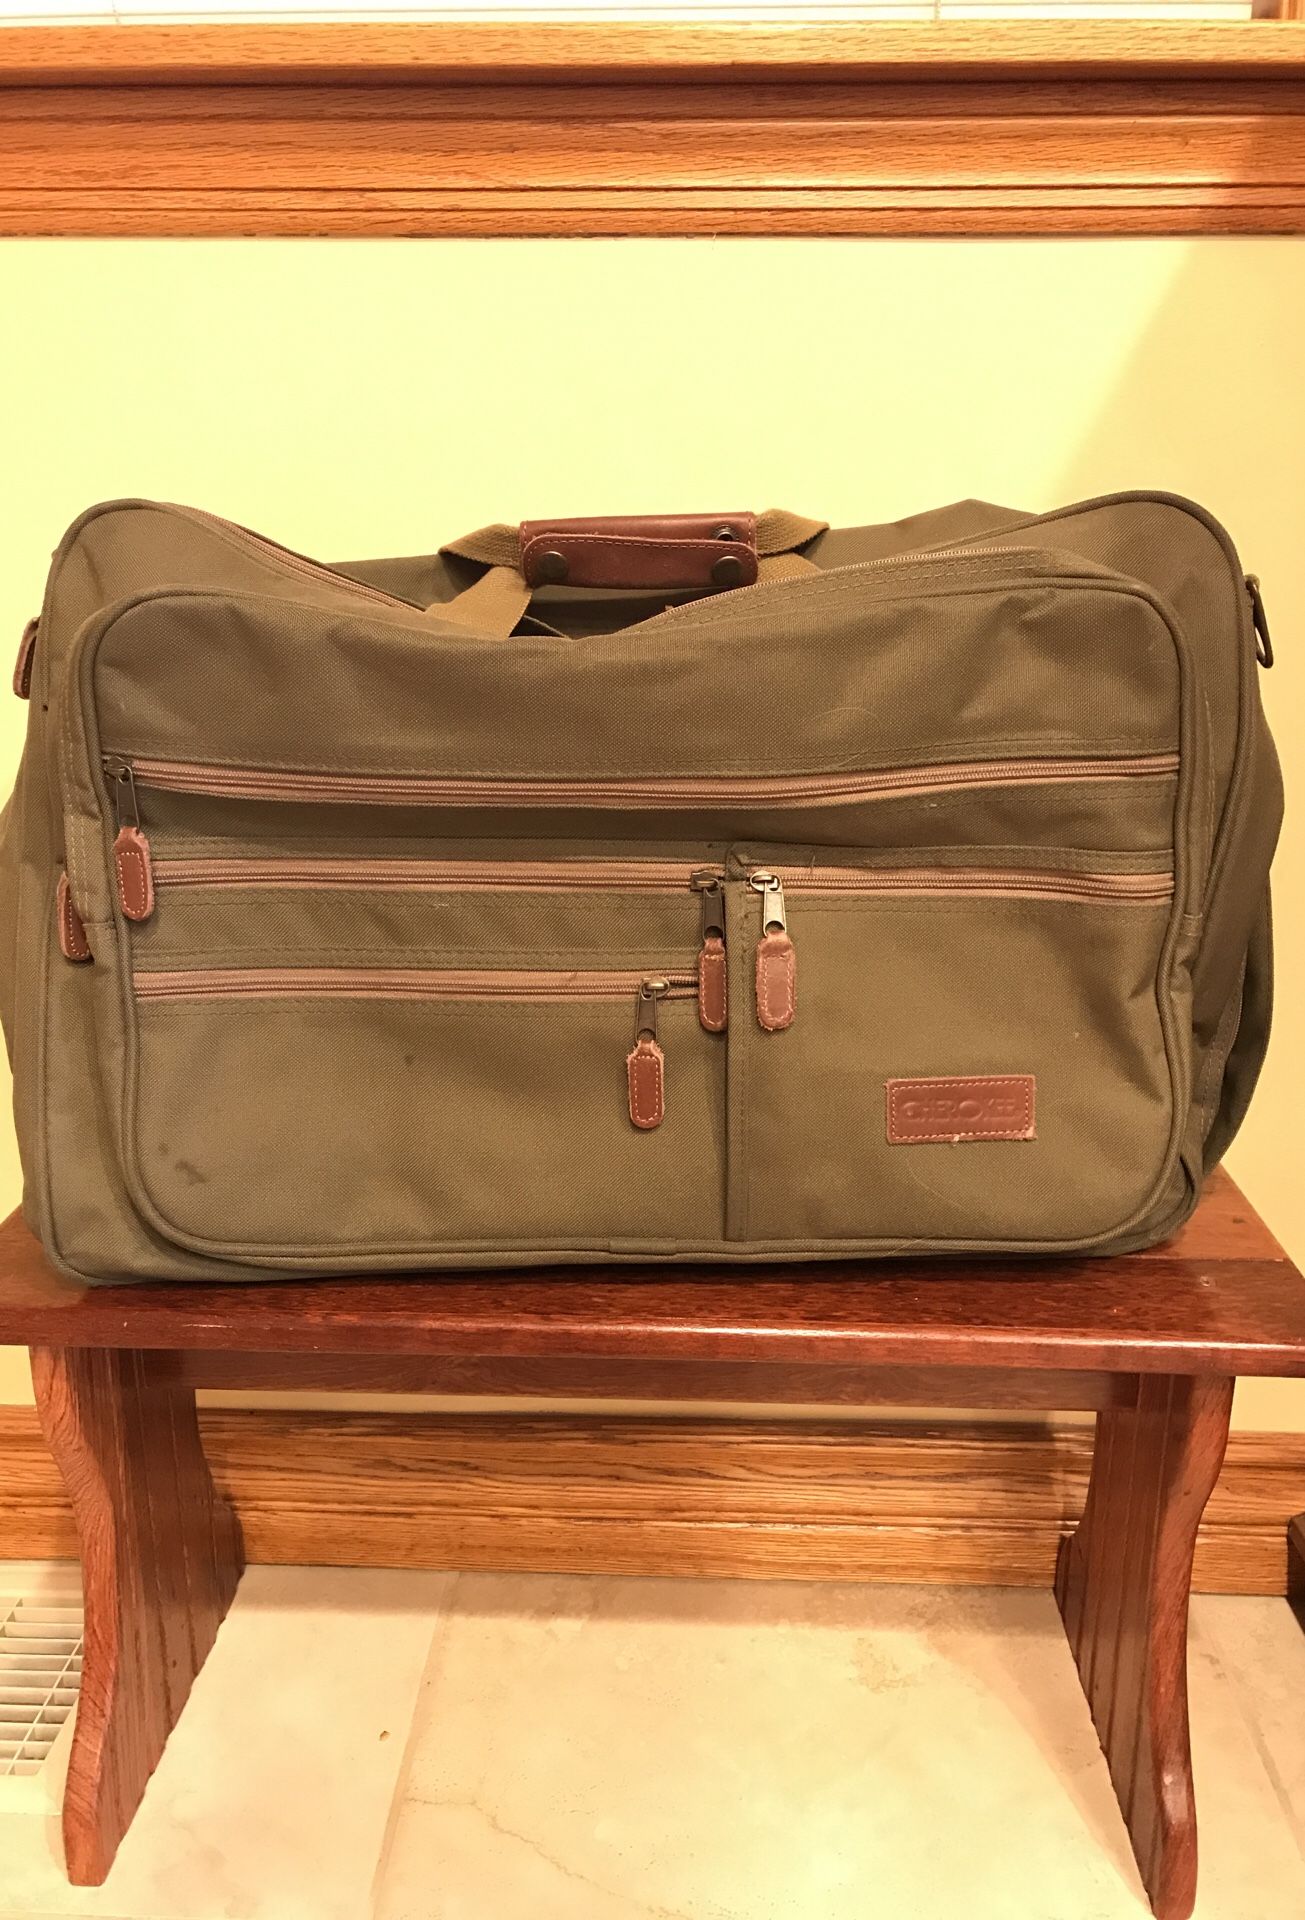 Olive heavy canvas travel bag.